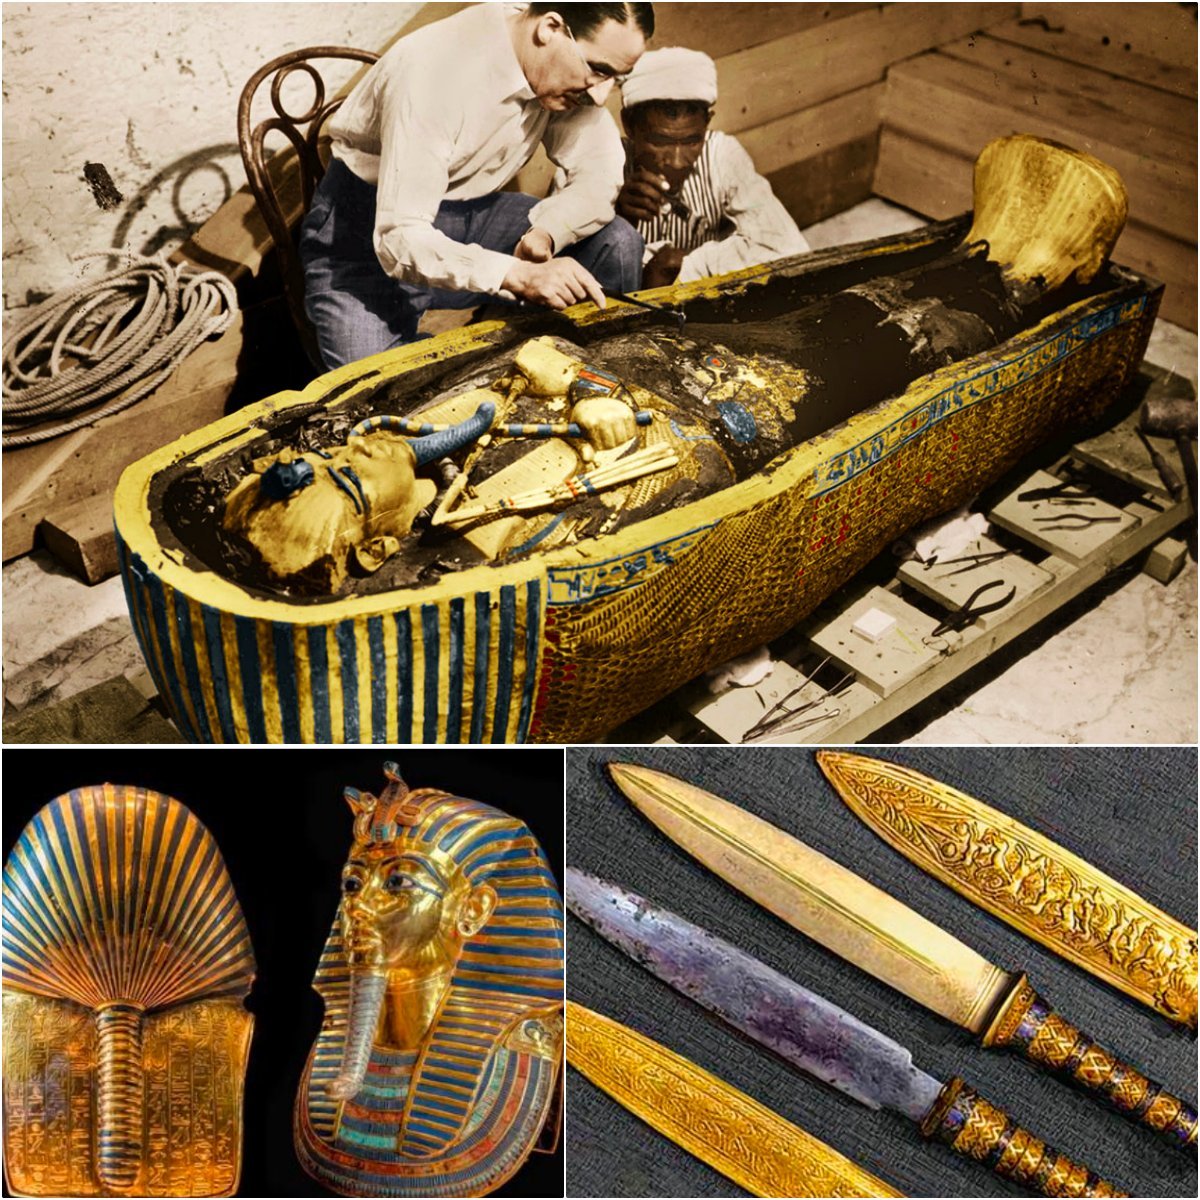 Discover the extraordinary artifacts in King Tutankhamun's tomb, including a dagger crafted from a meteorite.
👉More details: blogs.minecraft4.com/22297

 #KingTut #AncientArtifacts